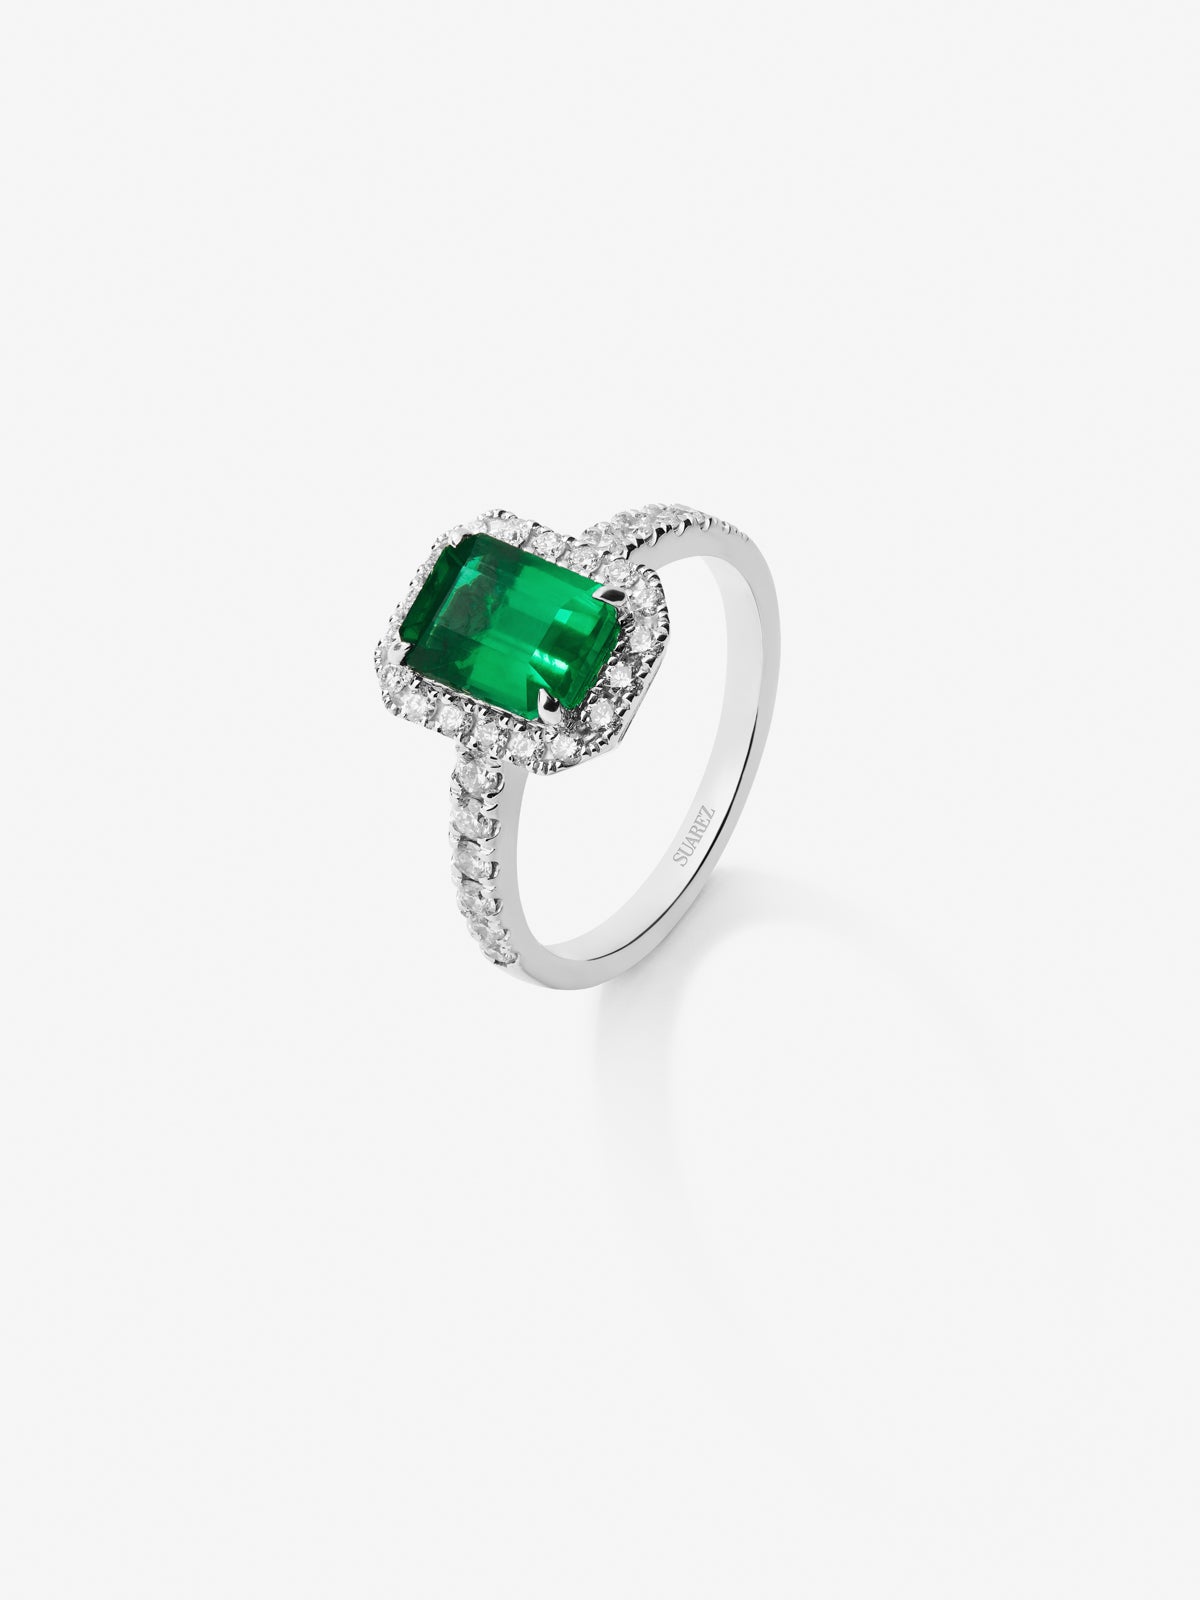 18K white gold ring with green emerald in octagonal cut of 1.67 cts and border and arm of 30 brilliant-cut diamonds with a total of 0.43 cts